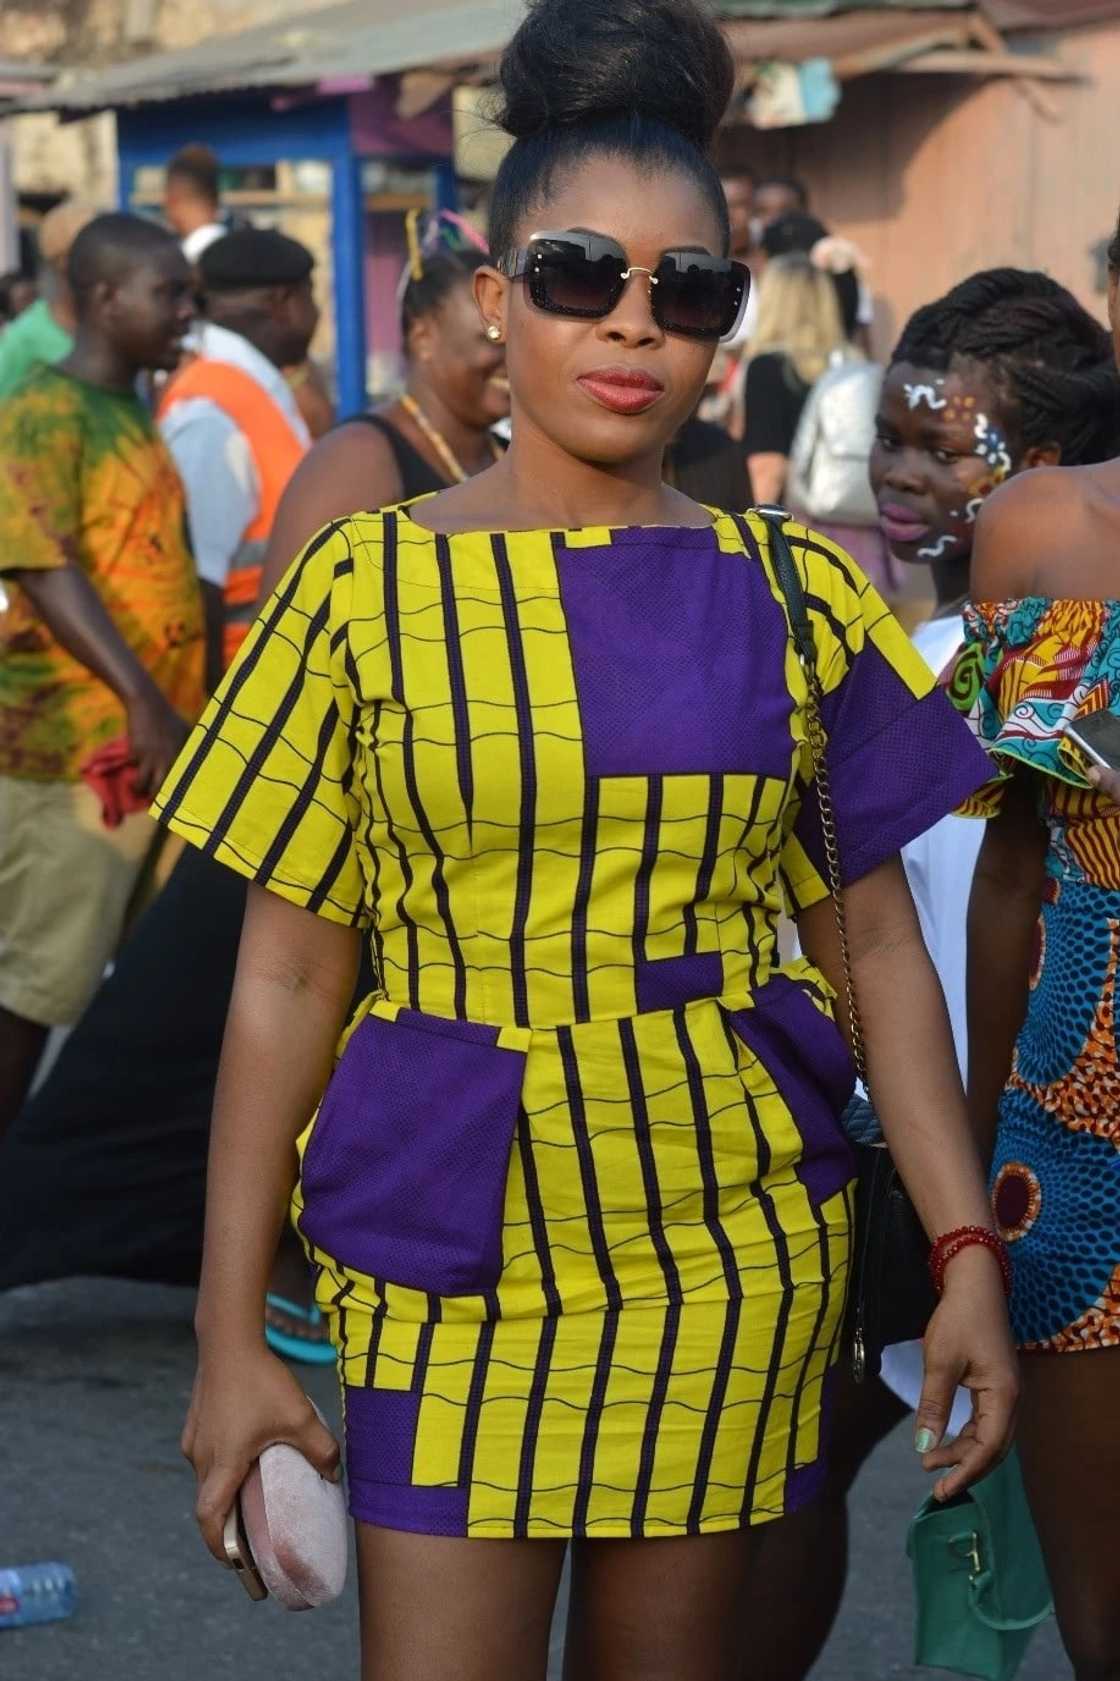 woodin styles dresses
woodin clothing styles
woodin collections